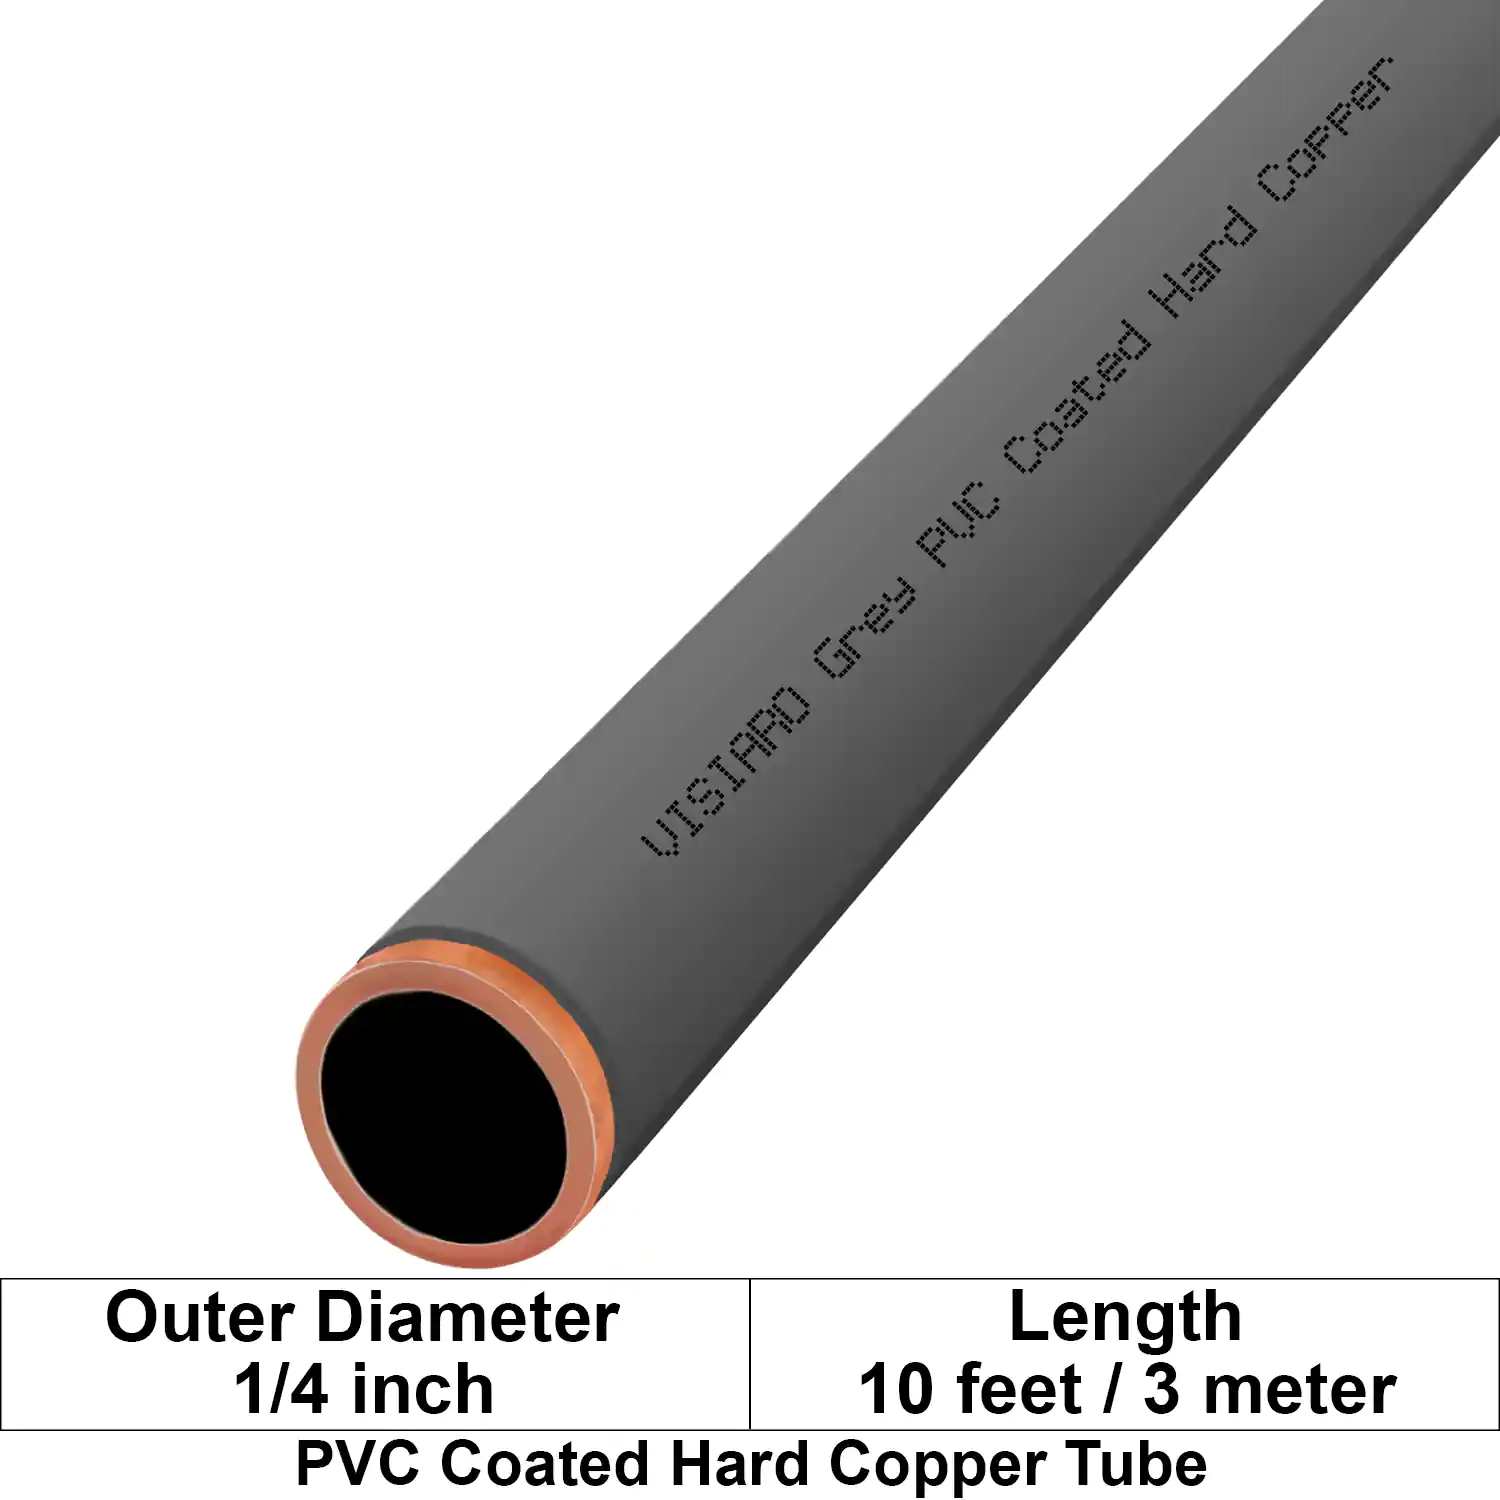 Visiaro Grey PVC Coated Hard Copper Tube 10ft long Outer Diameter - 1/4 inch